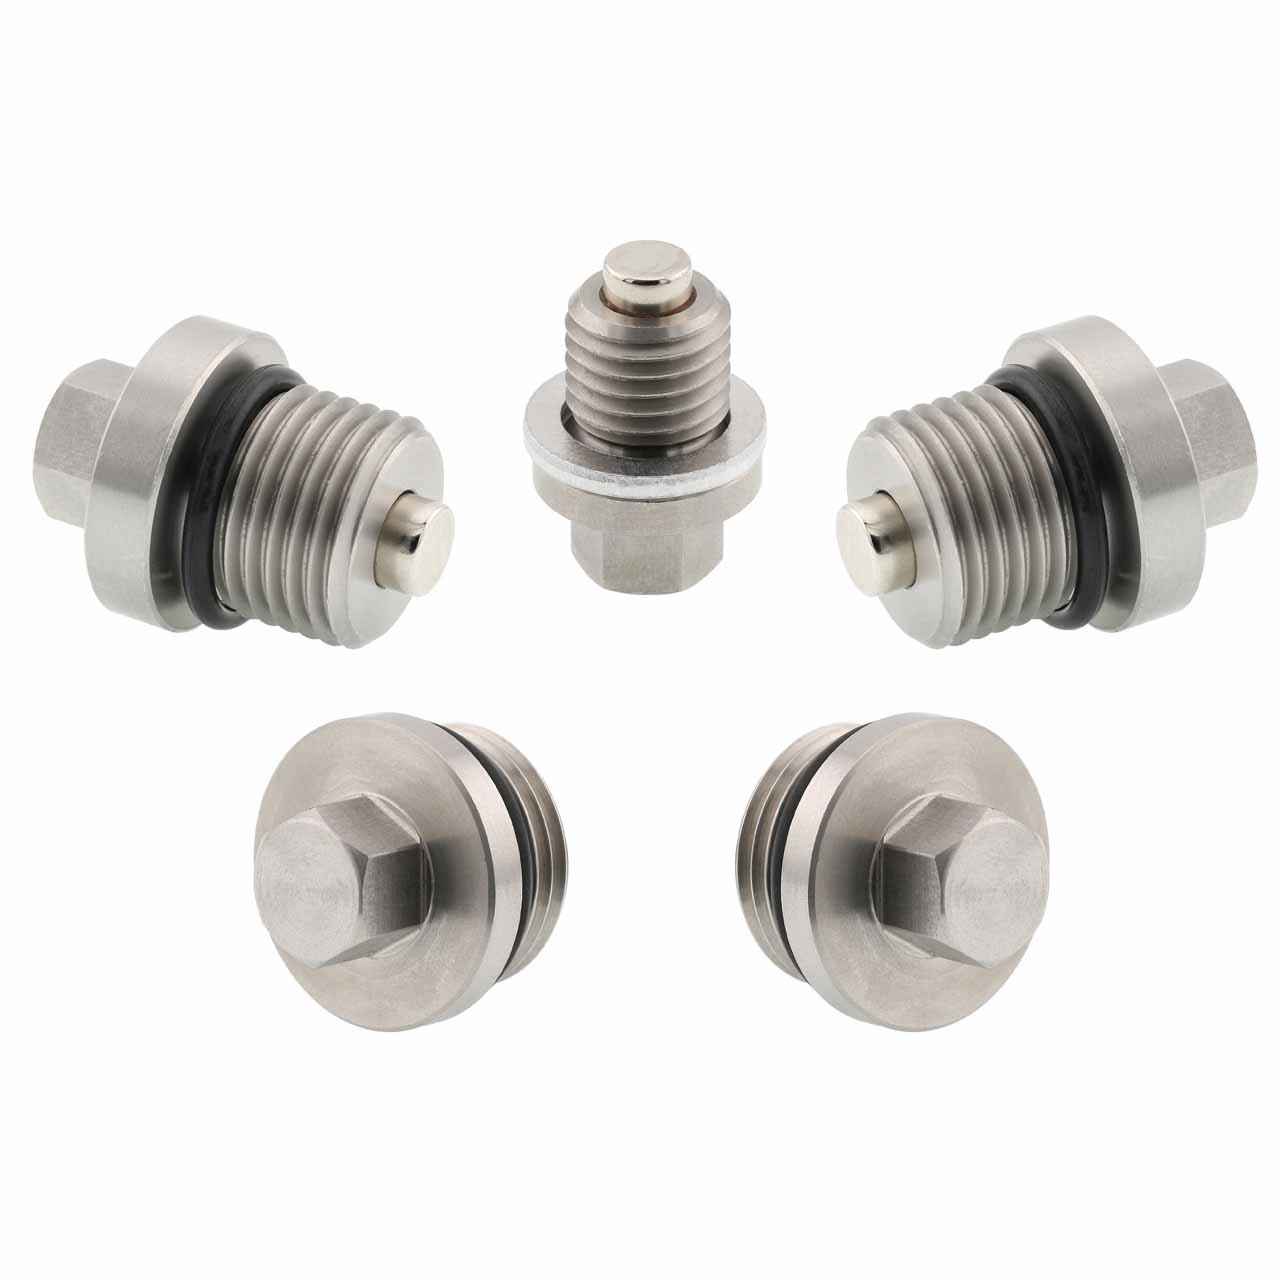 Polaris RZR 570 EPS Magnetic Oil Drain Plug Kit - 2014-2019 - Engine, Transmission, Differential - Made In USA